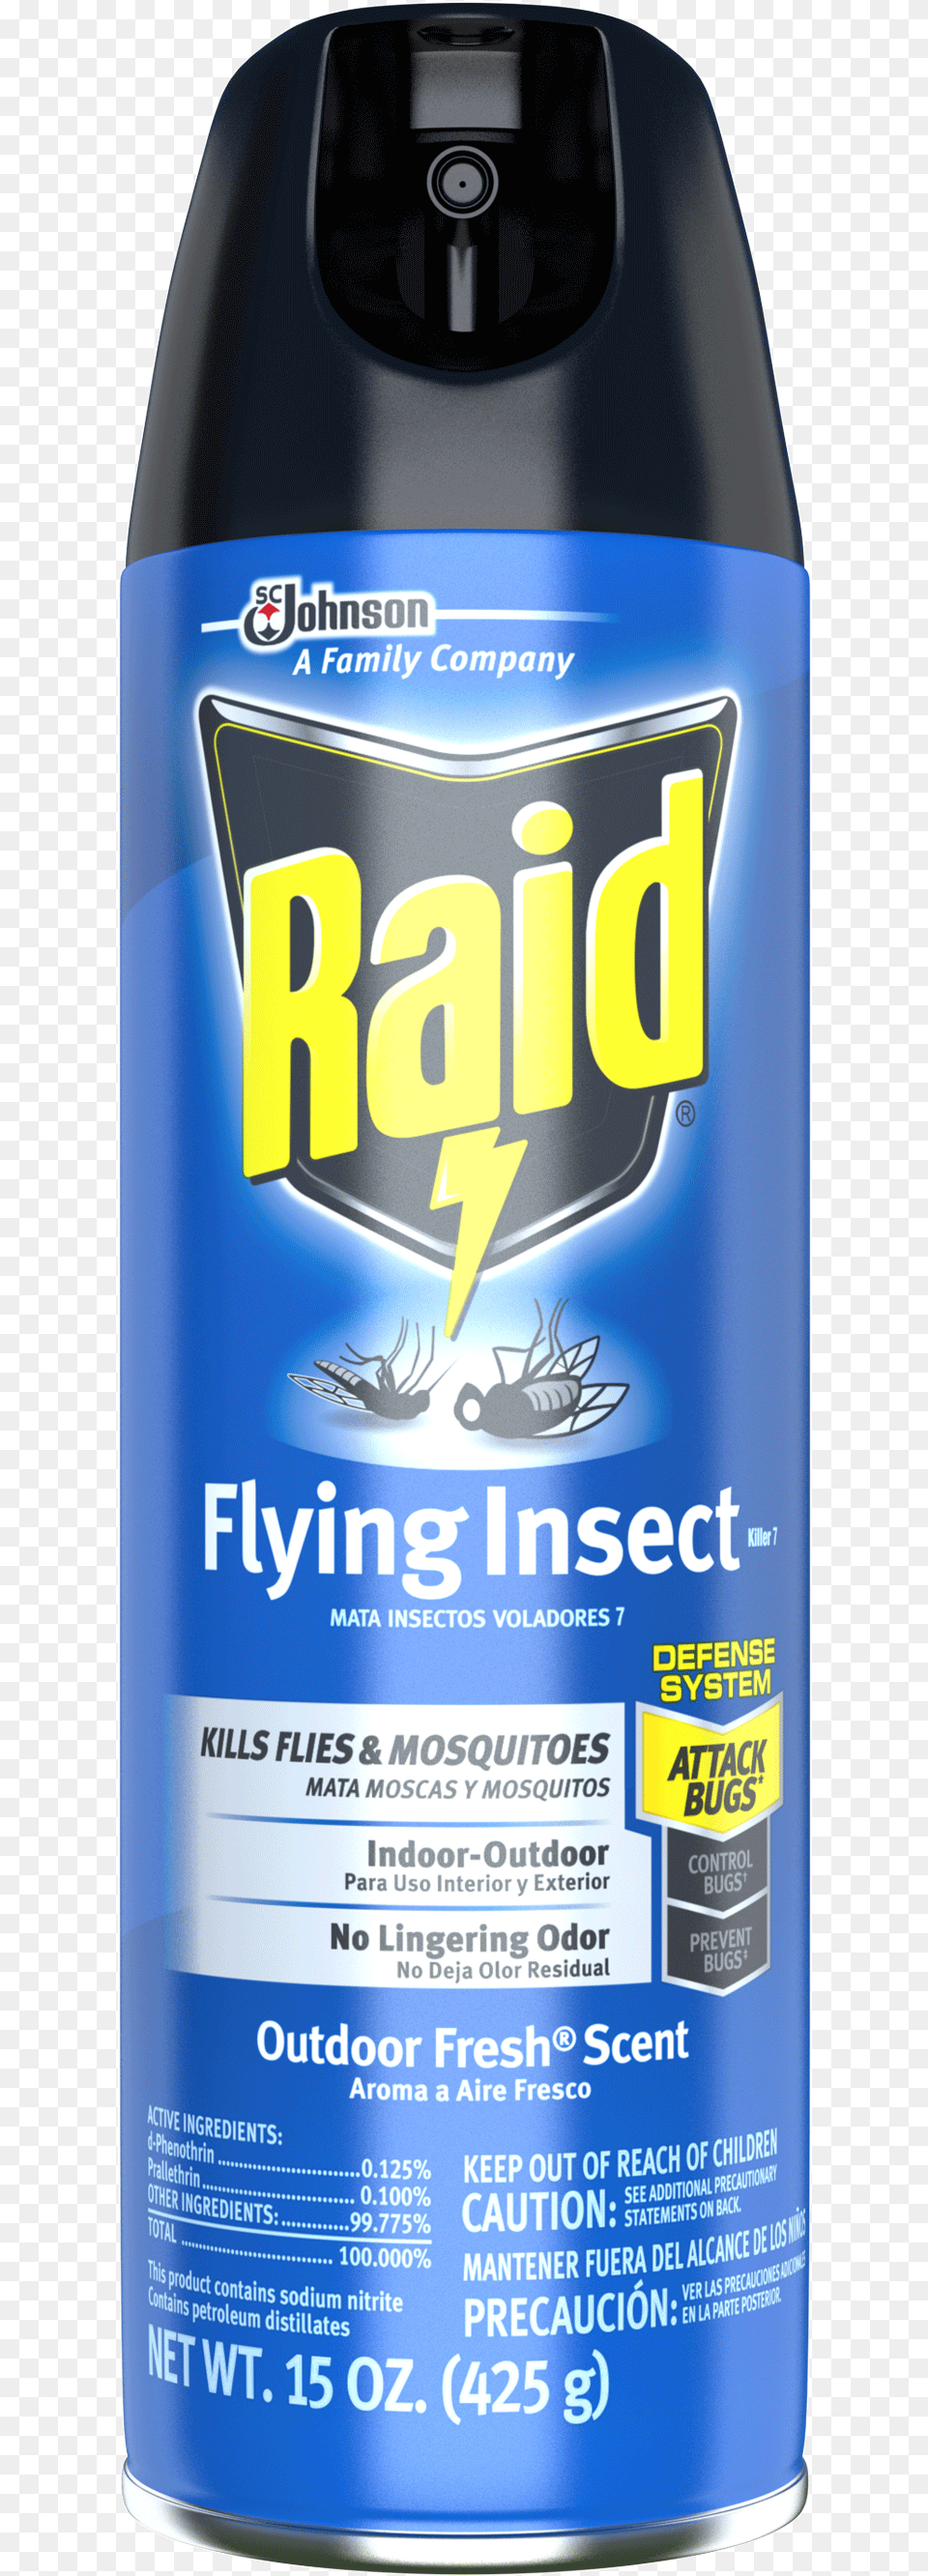 Raid Flying Insect Killer Is Specially Formulated Raid Flying Insect Killer 15 Oz, Tin, Can, Bottle Png